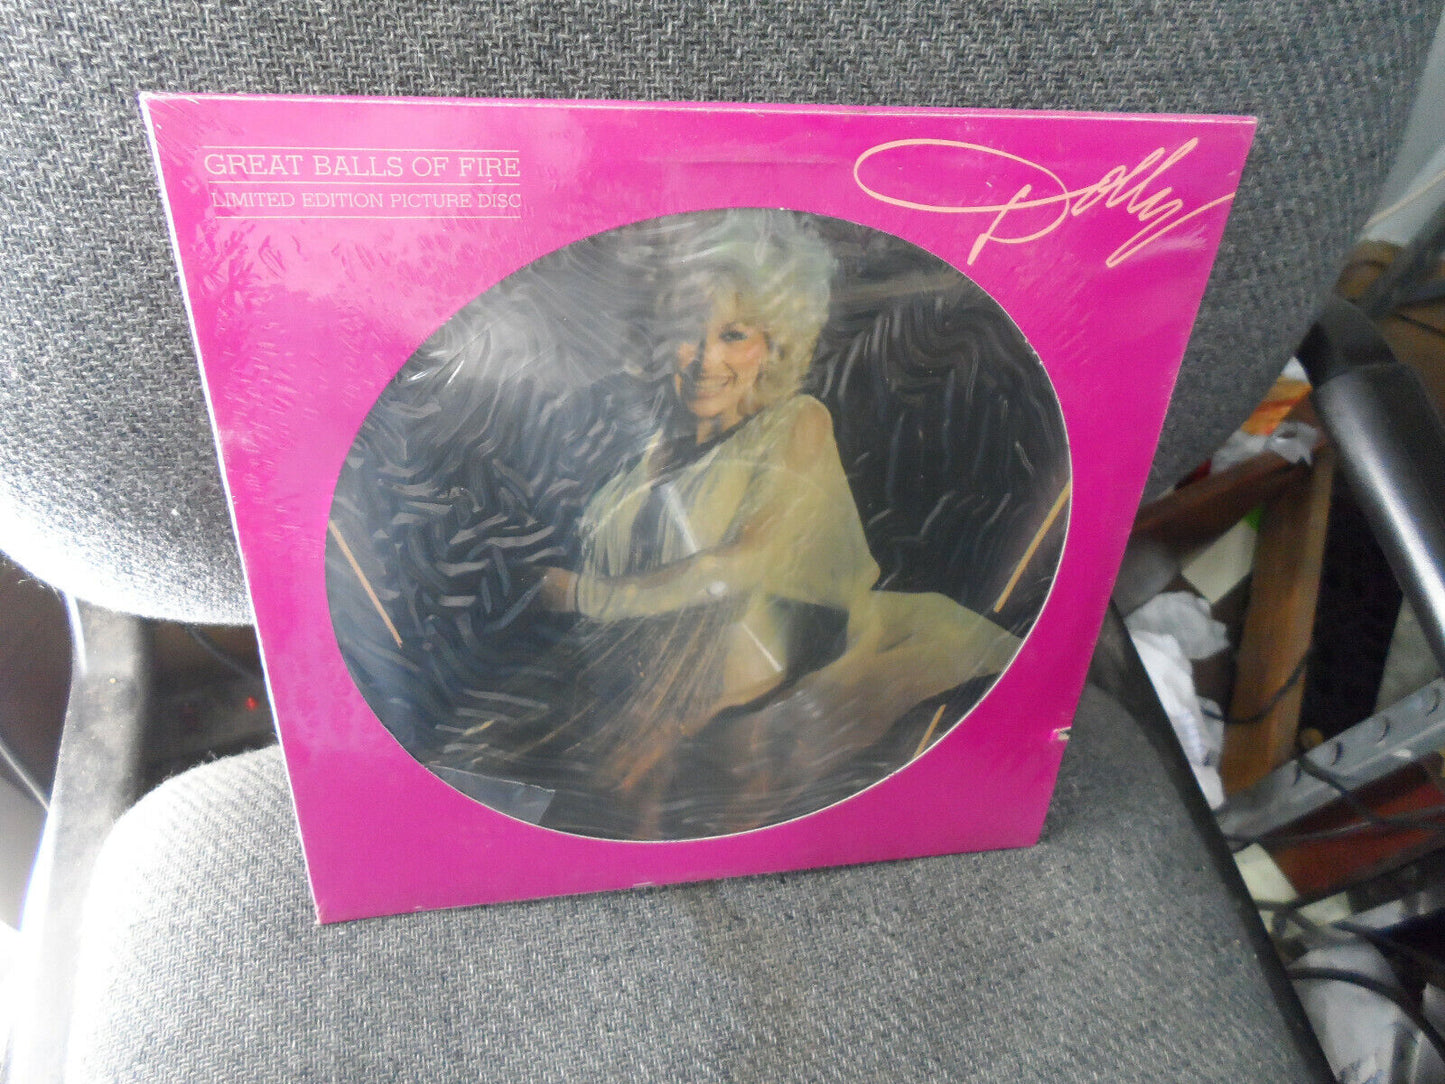 DOLLY PARTON Great Balls Of Fire 1979 Ltd Ed US PICTURE DISC LP SEALED